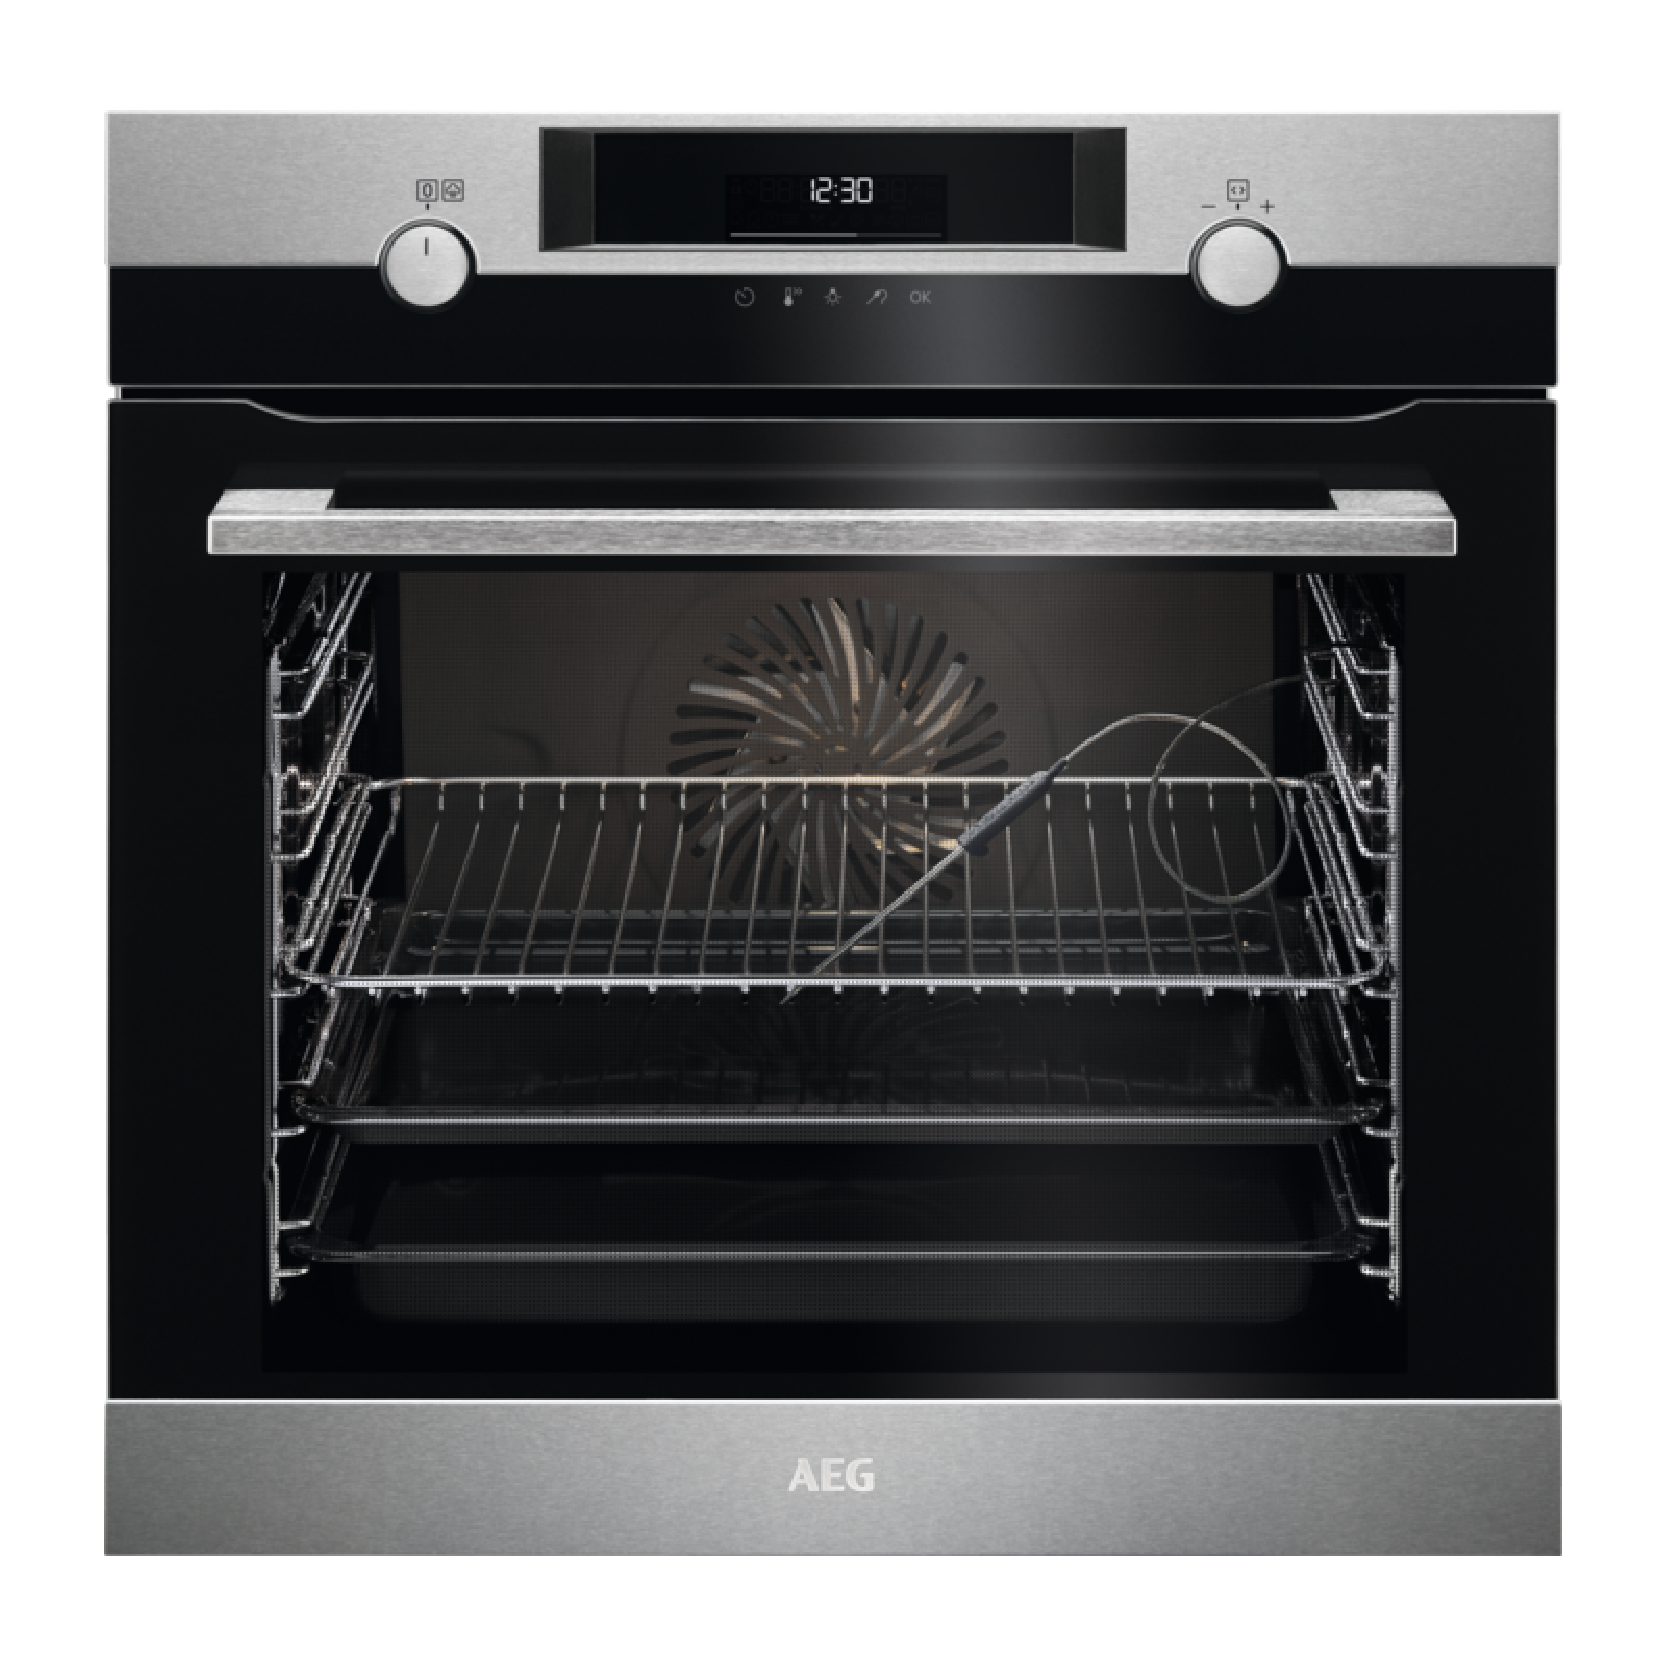 MULTIFUNCTION OVEN SENSECOOK CATALYTIC SELF-CLEANING AND STEAMBAKE AND ROTARY CONTROLS AEG | BCK55636XM